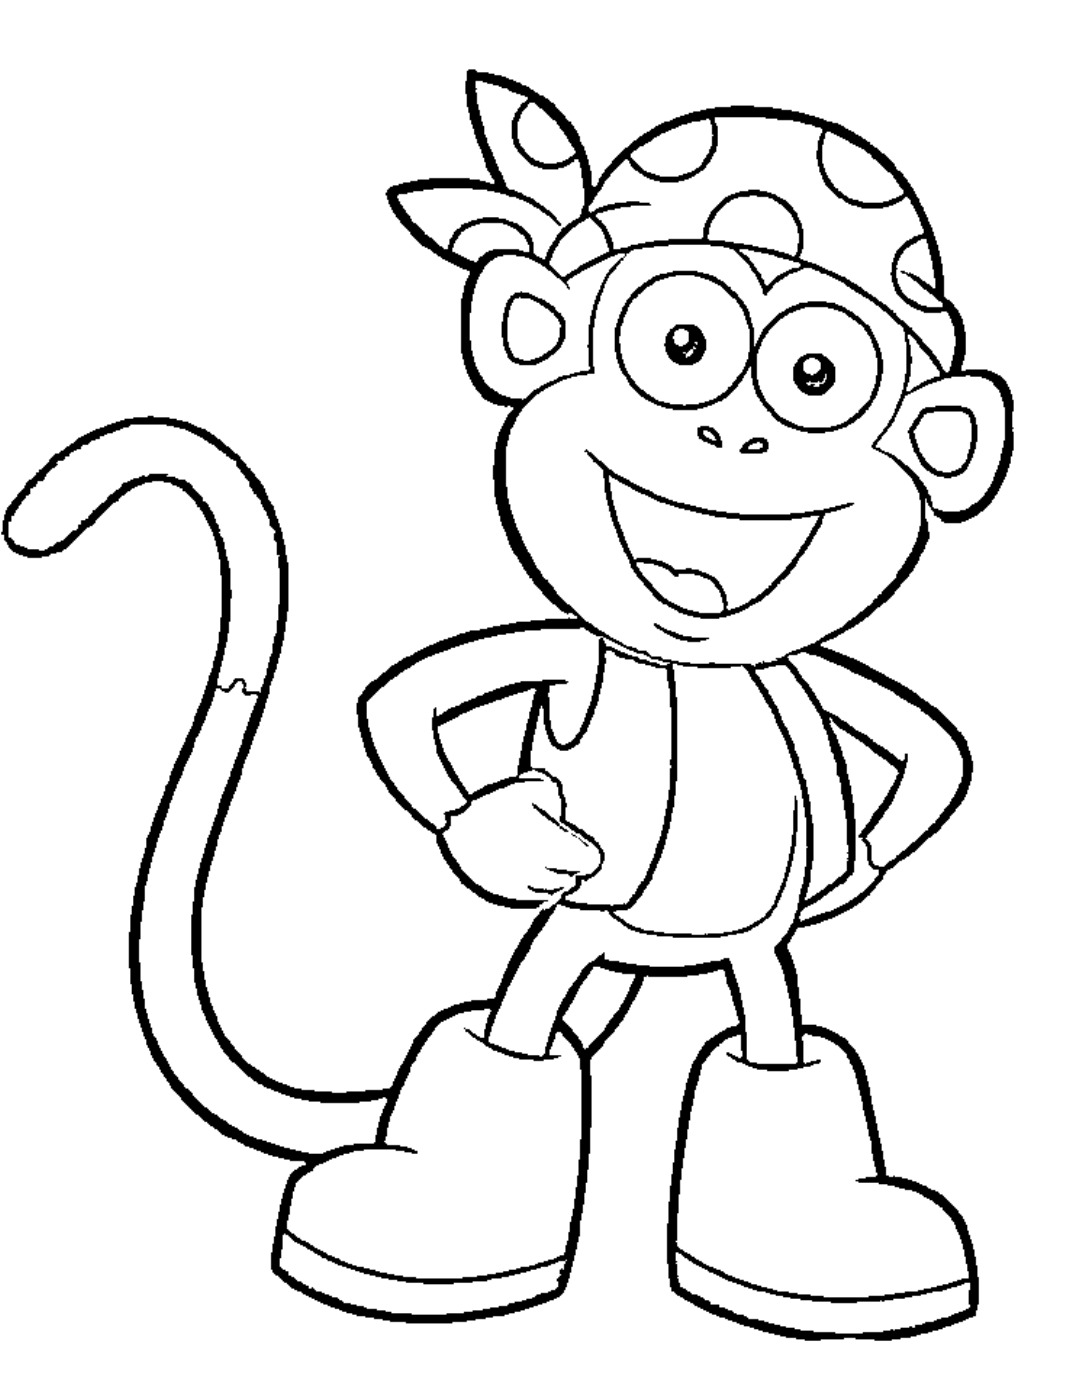 Dora And Boots Coloring Pages at GetColorings.com | Free printable ...